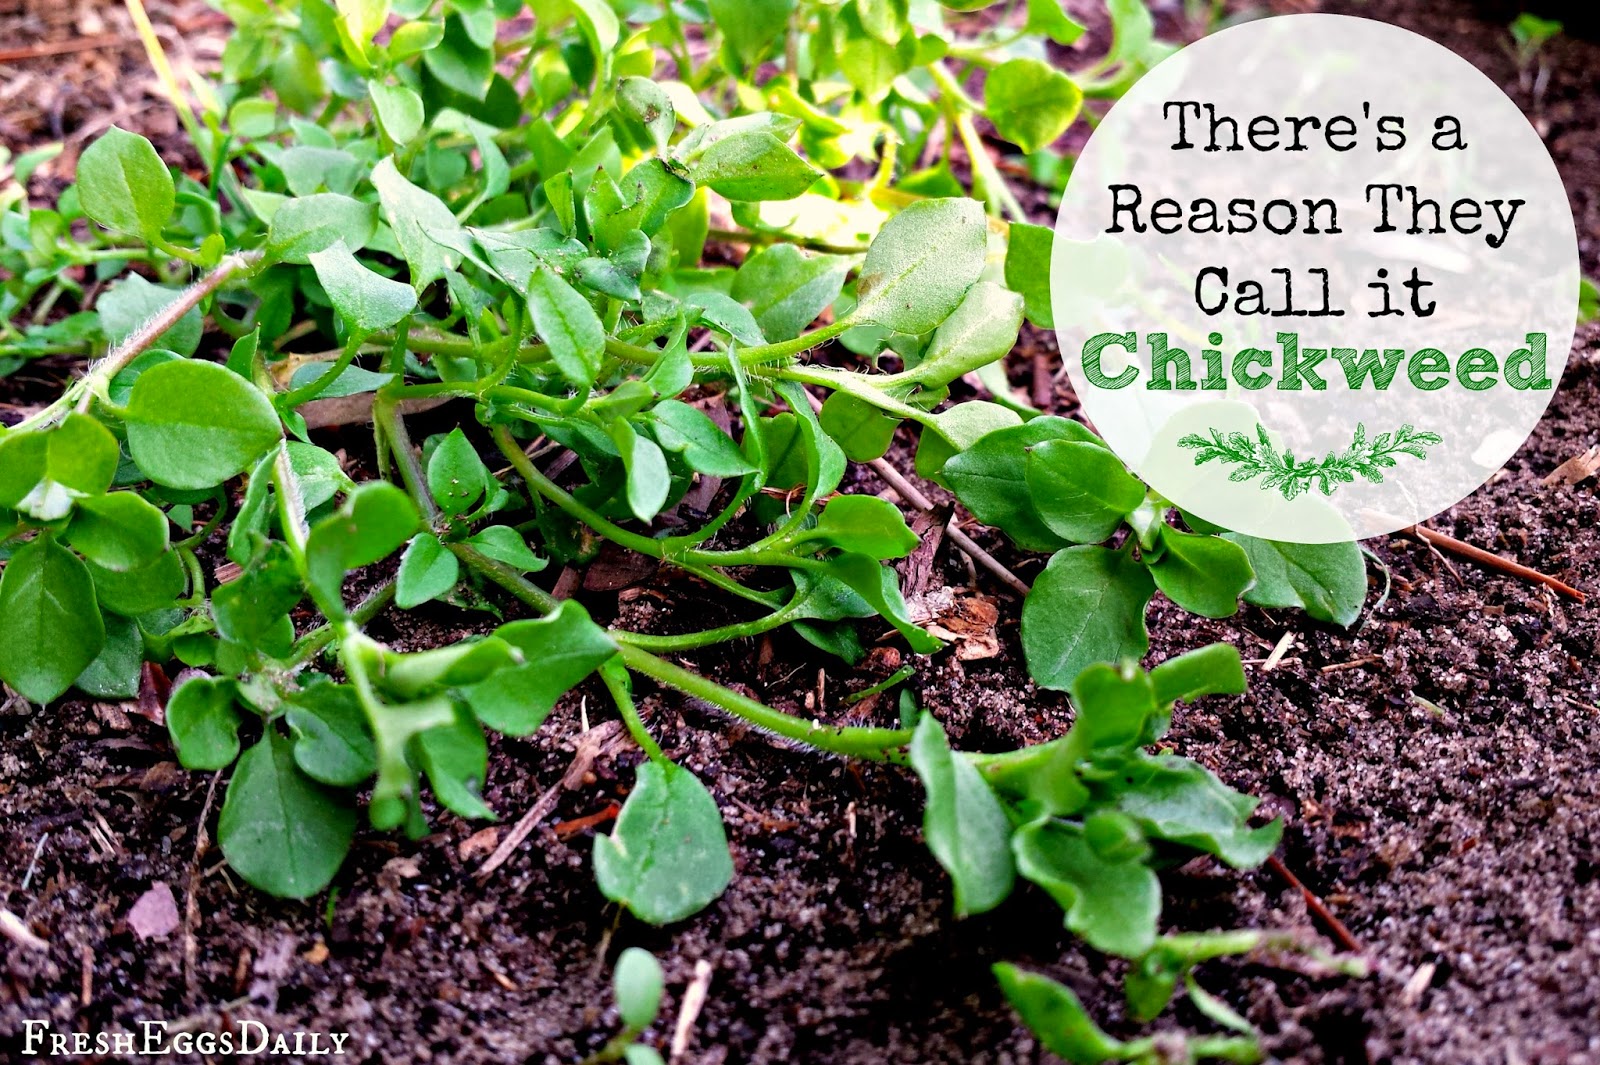 Is Chickweed Good for Chickens